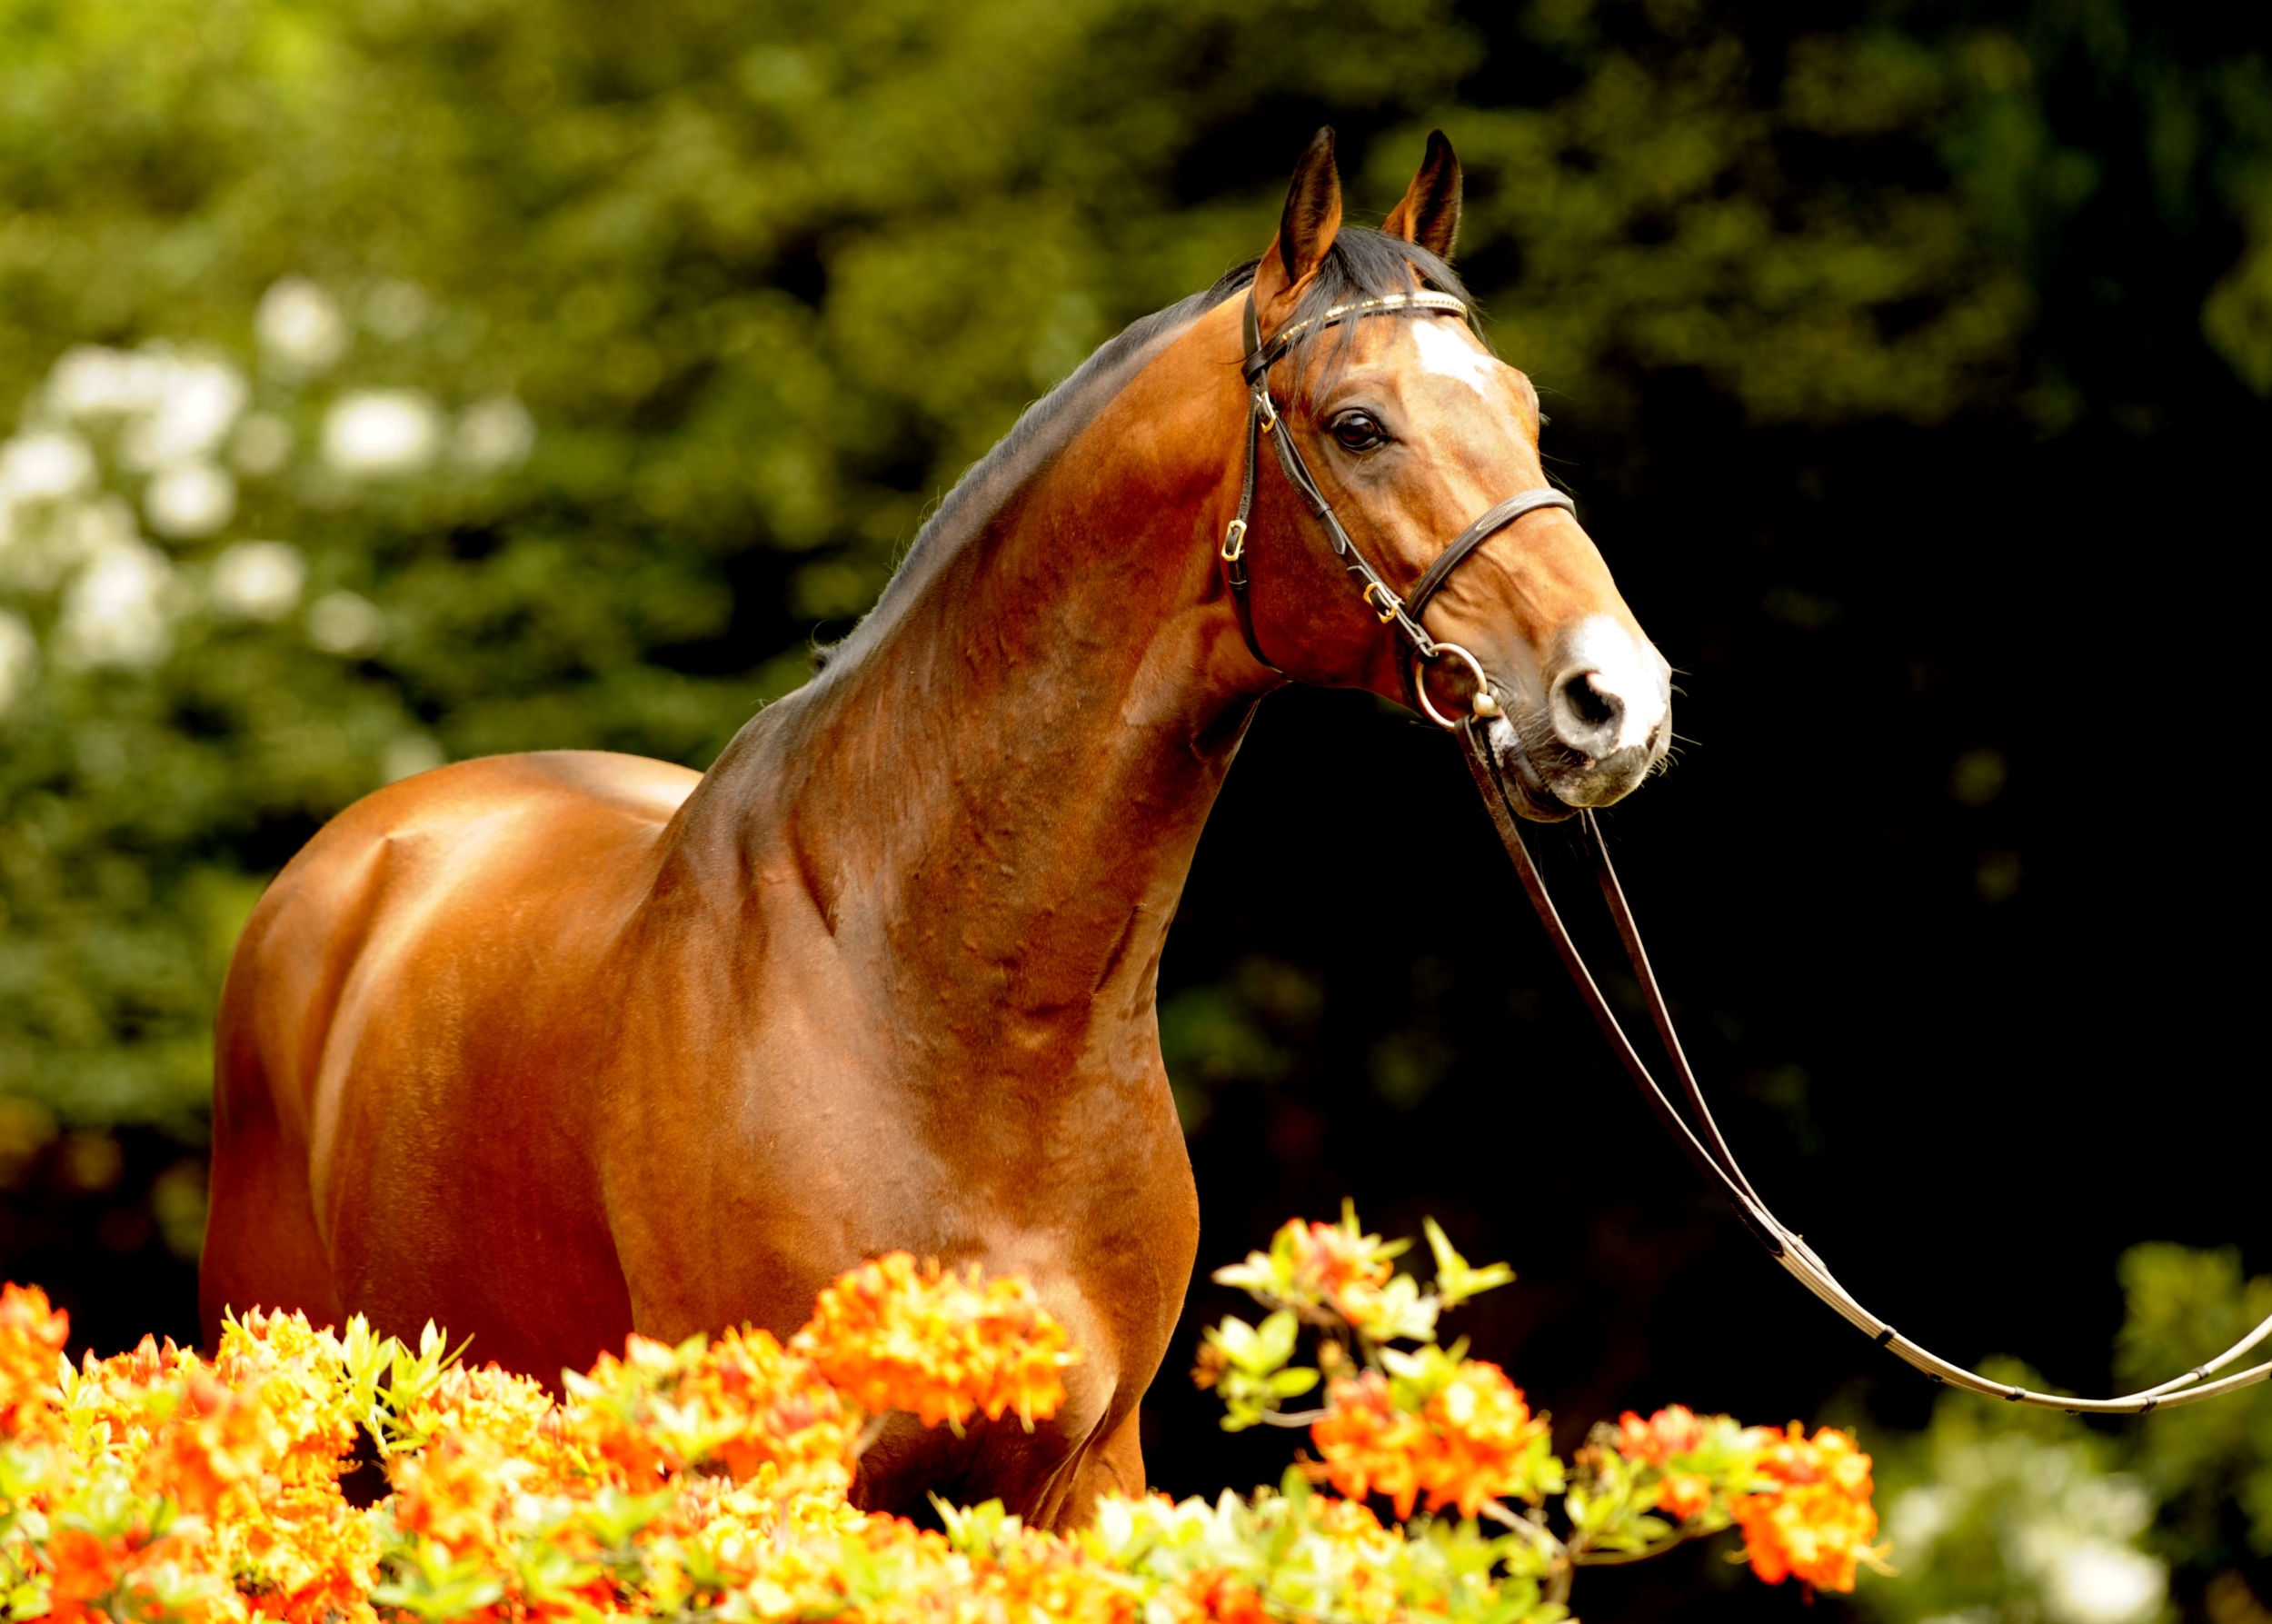 Conway II, a light brown Stallion horse standing in a field of yellow flowers